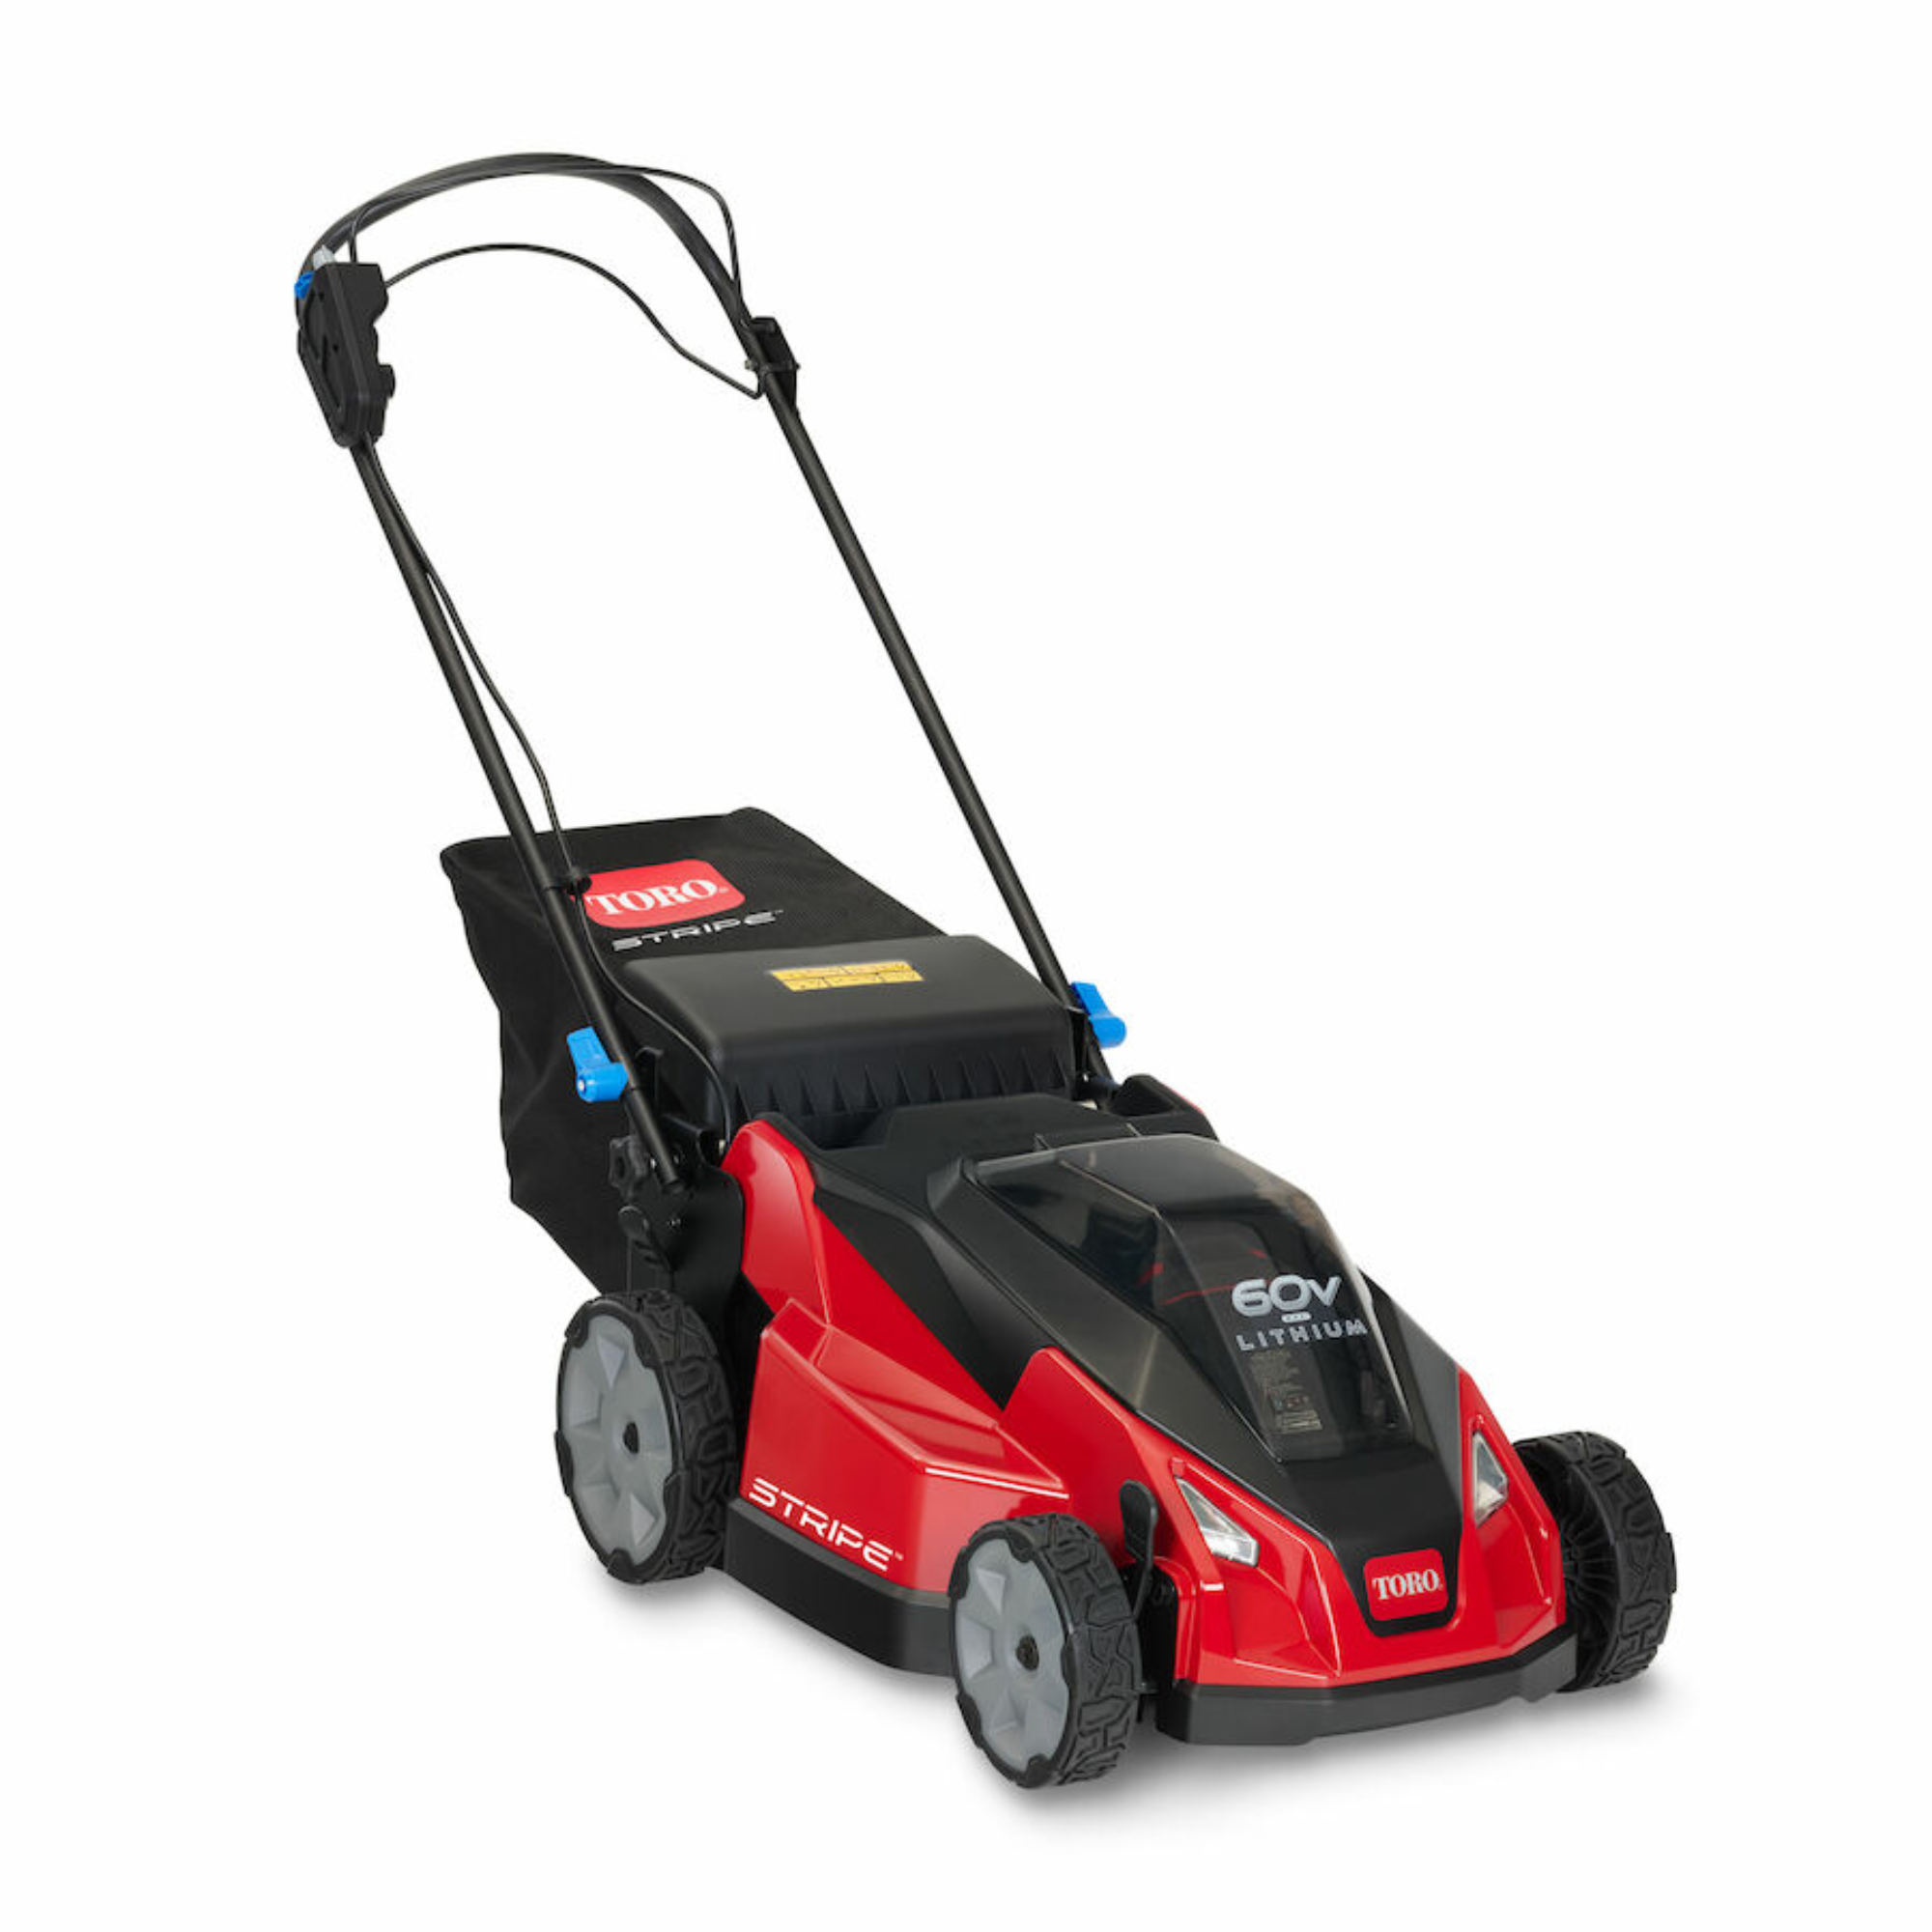 Toro 60V MAX 21 in. Stripe Self-Propelled Mower - 6.0Ah Battery / Charger Included